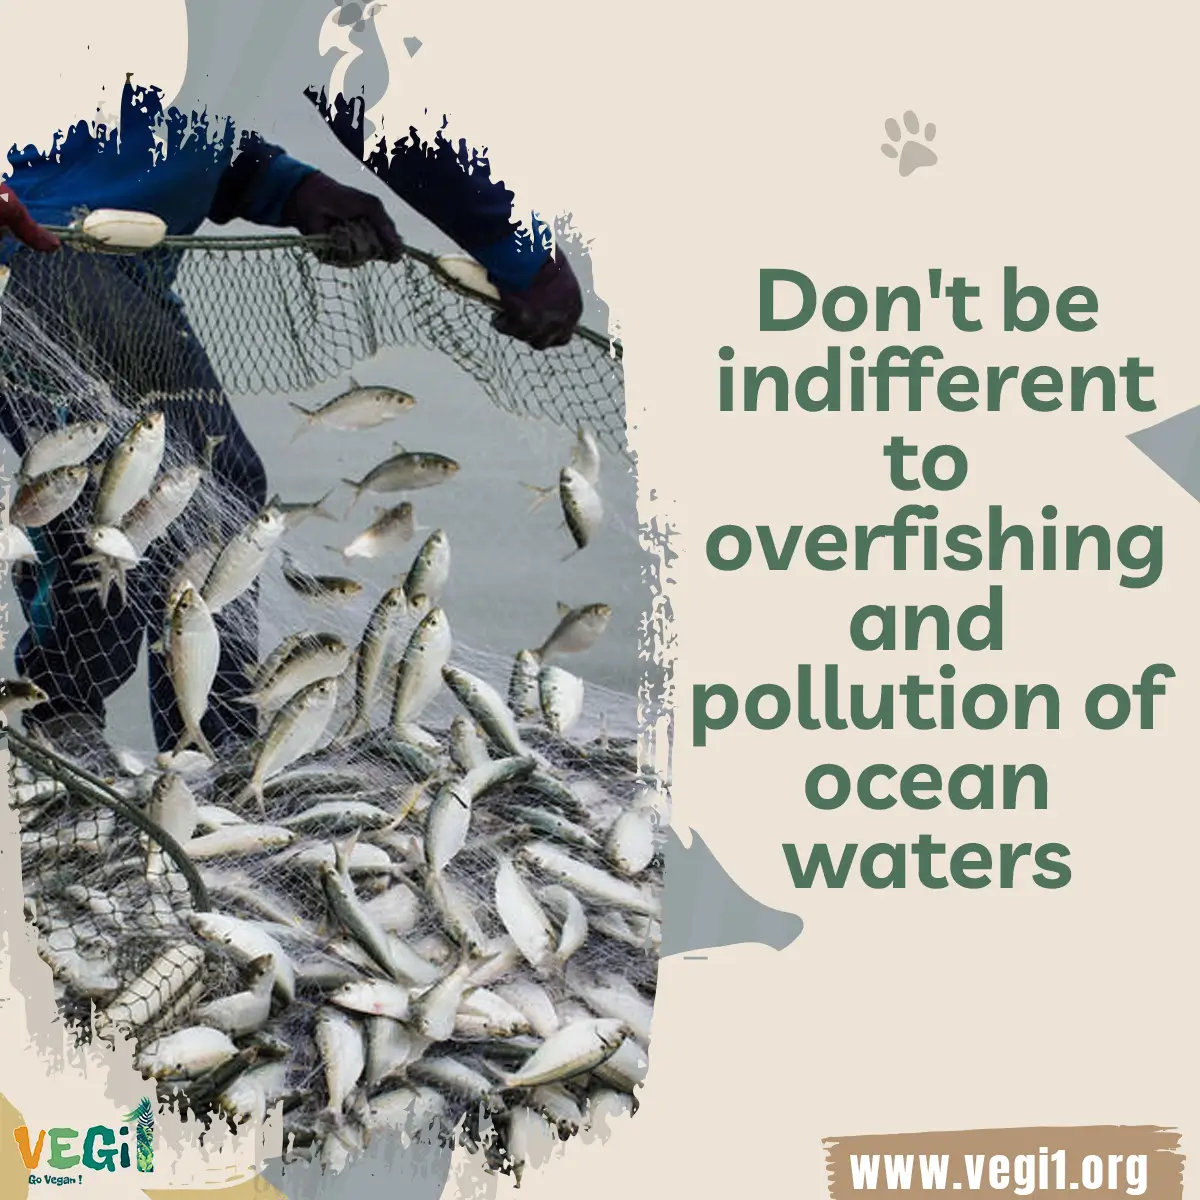 Don't be indifferent to overfishing and pollution of ocean waters